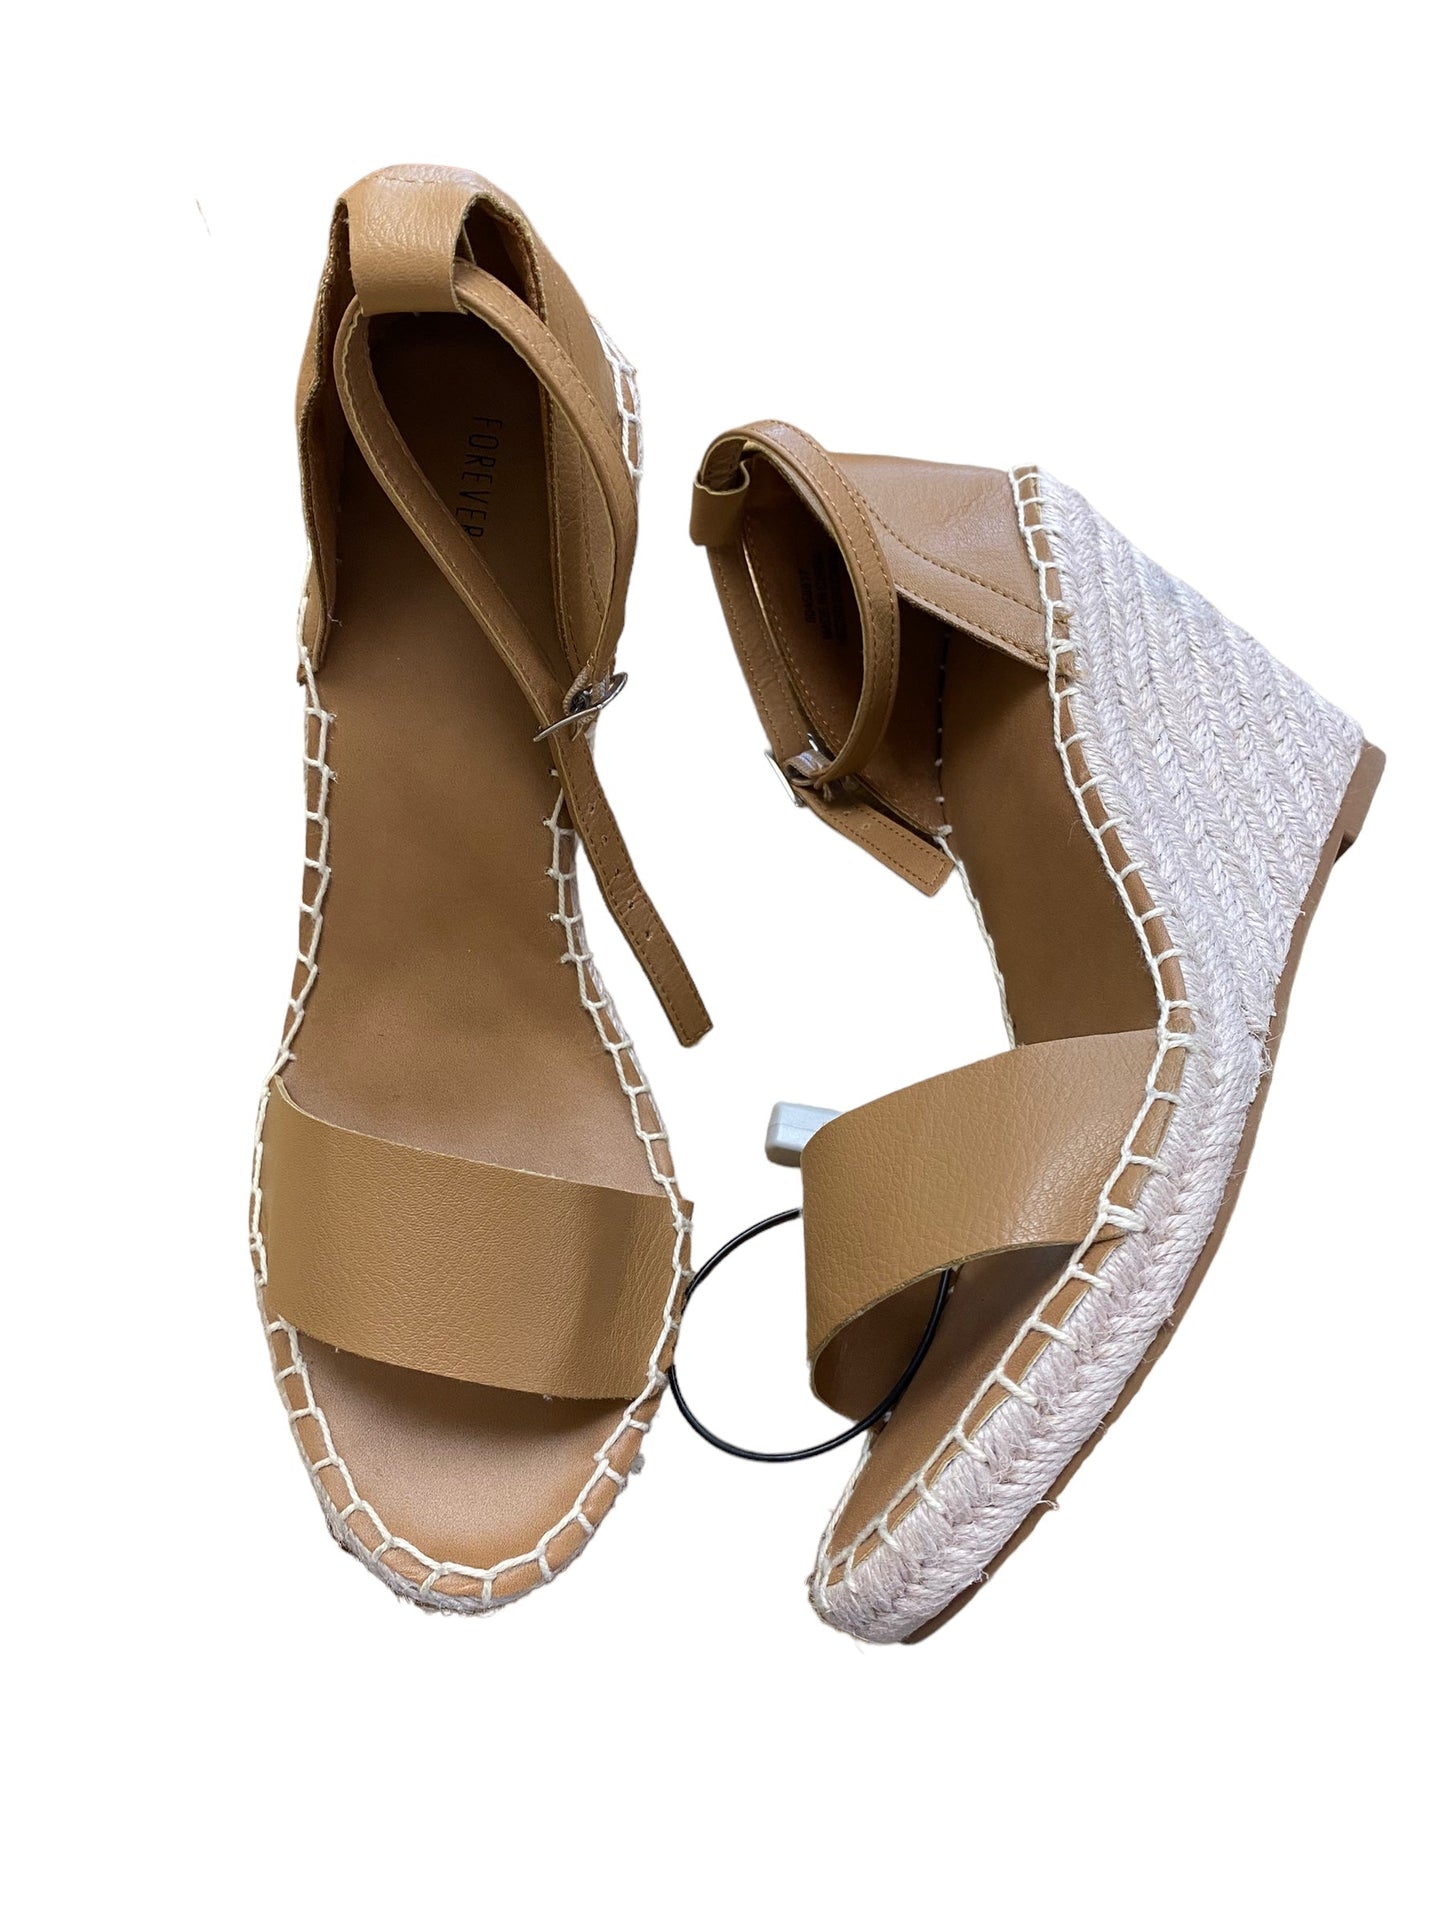 Sandals Heels Wedge By Forever 21  Size: 8.5